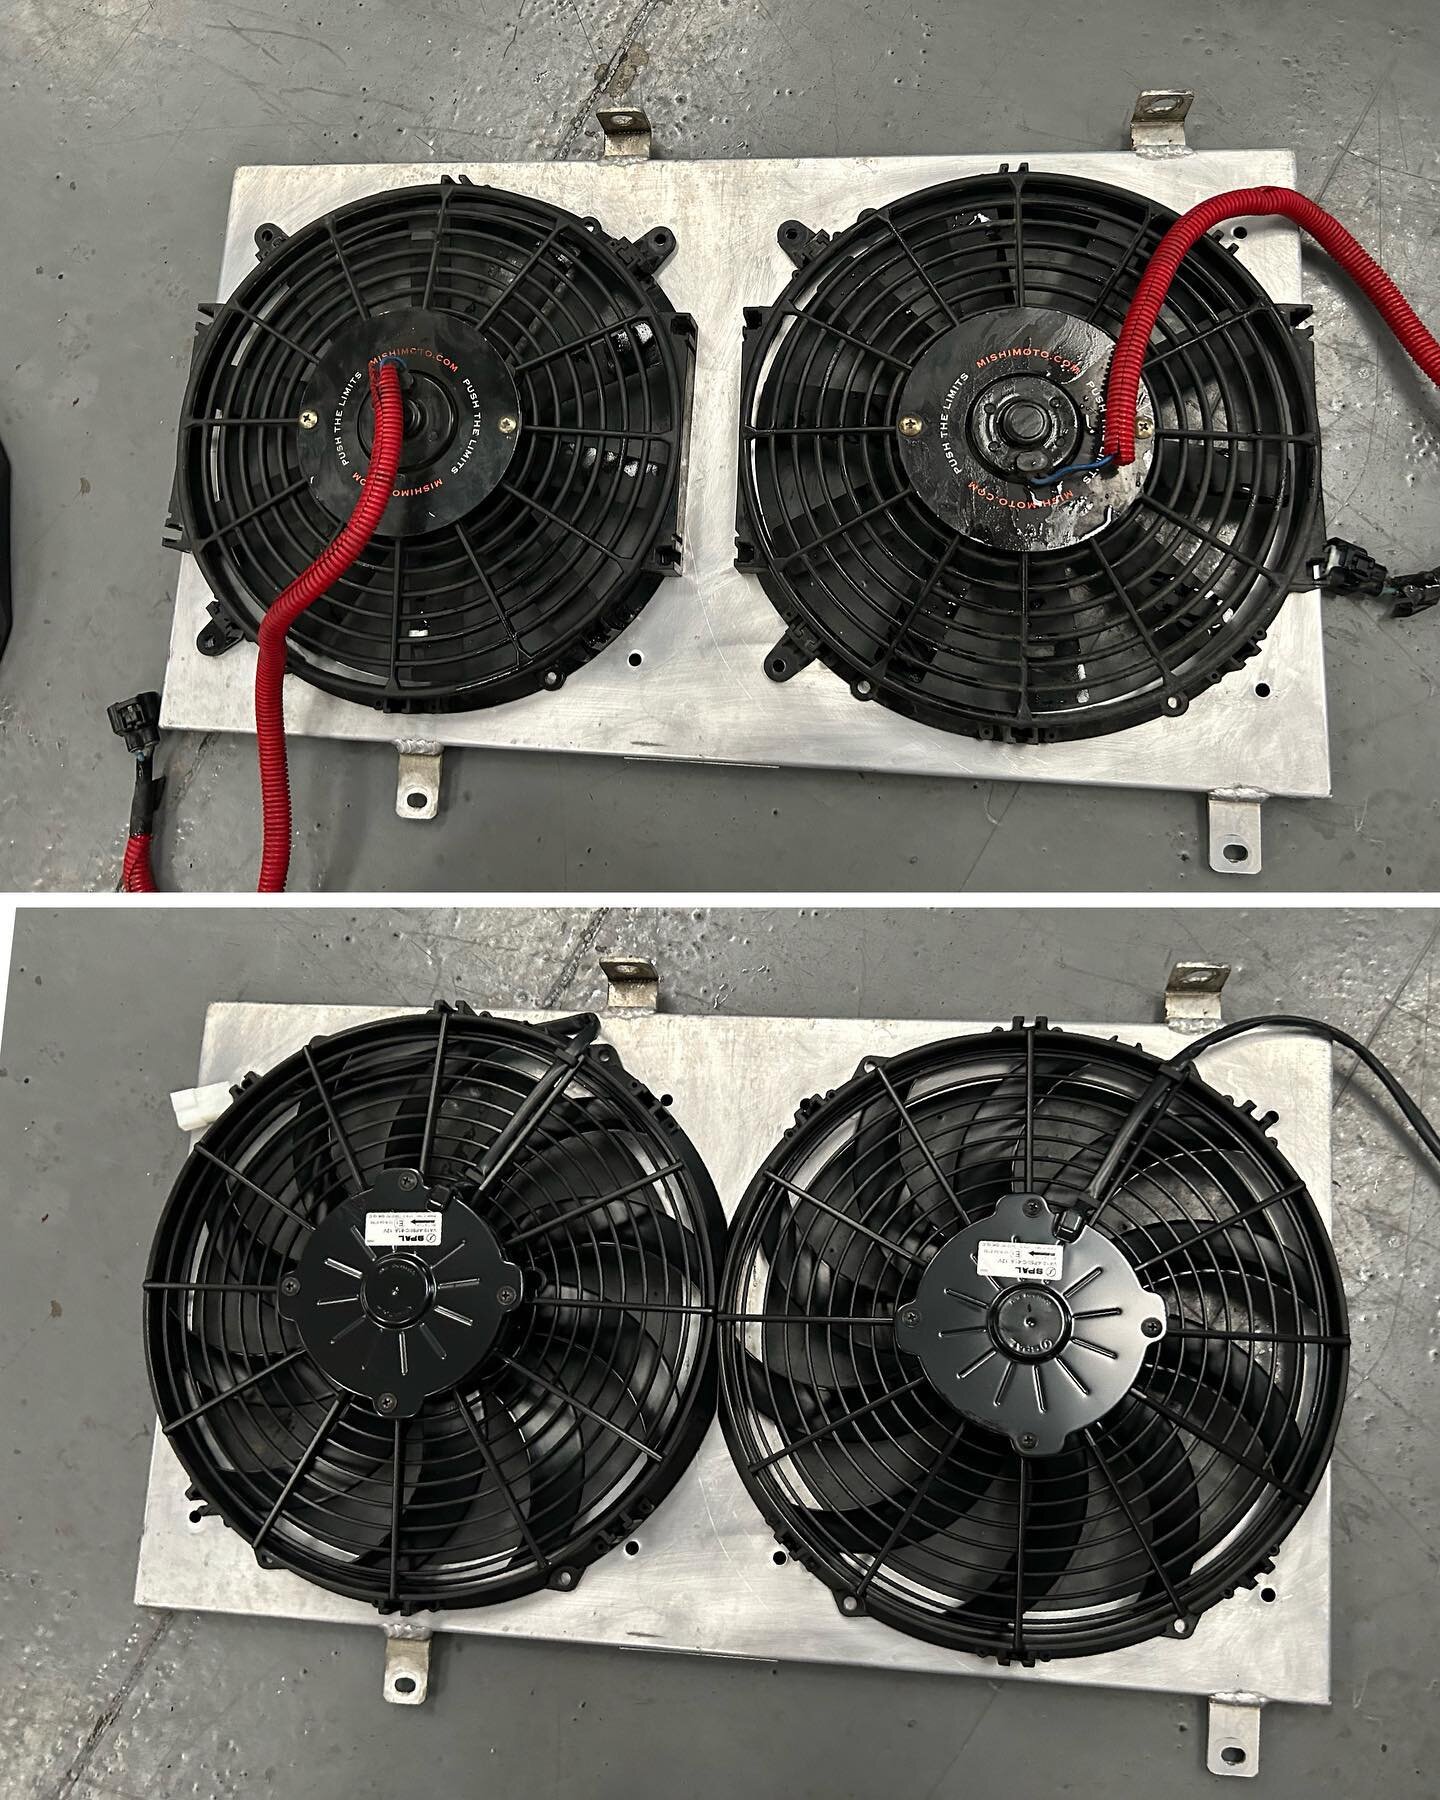 Upgraded these 7A #Mishimoto 12&rdquo; fans to some 13A #SPAL 12&rdquo; fans. For them both being advertised as the same size one sure looks bigger.  #arhindrichsllc #houston #texas #cypresstexas #thatmiatashop #fanupgrade #spalfans #coolingupgrade